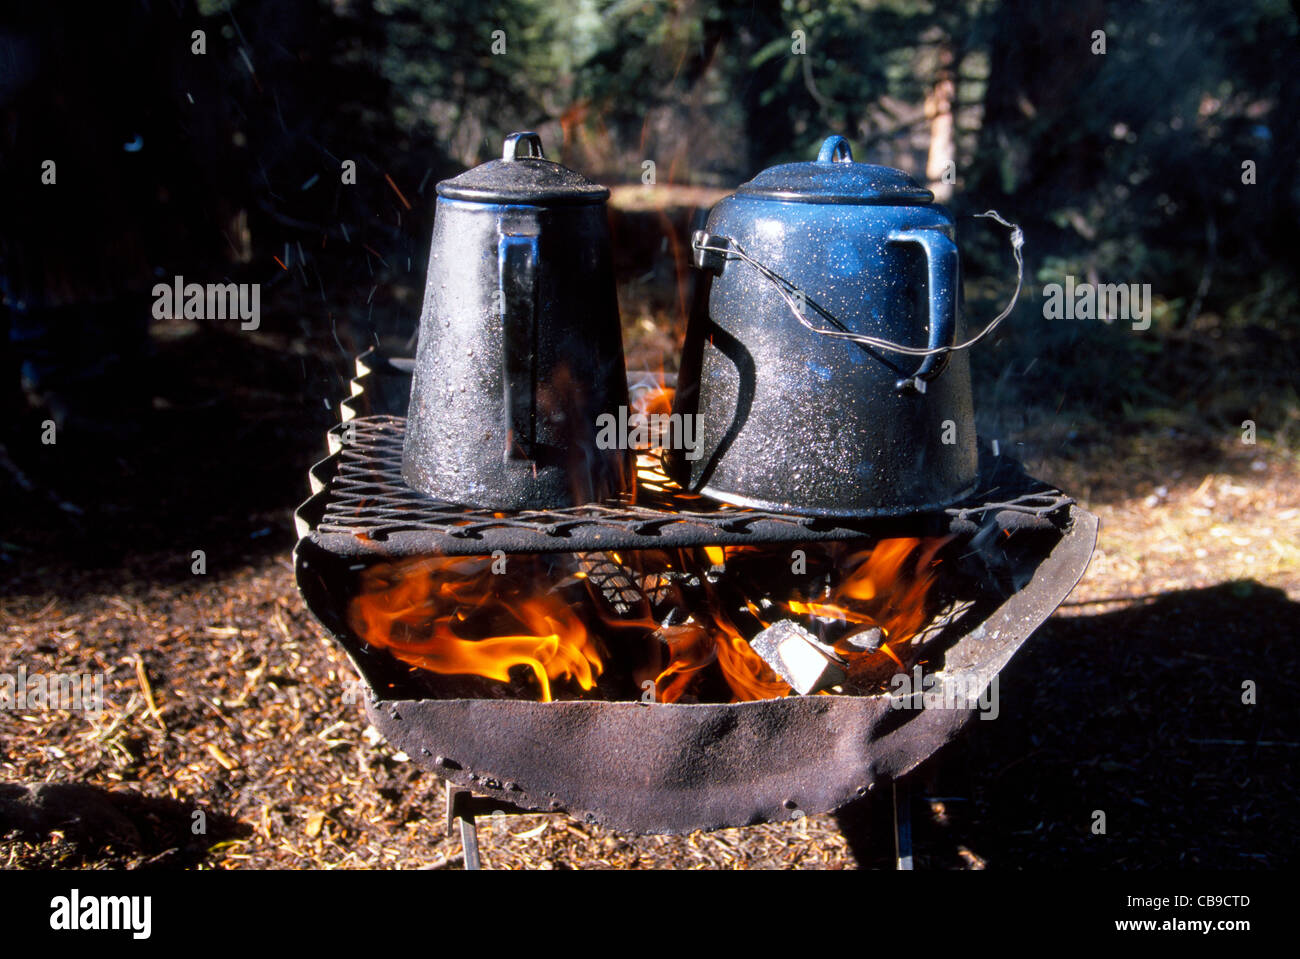 https://c8.alamy.com/comp/CB9CTD/cowboy-coffee-is-being-brewed-in-enamelware-pots-that-are-heated-over-CB9CTD.jpg